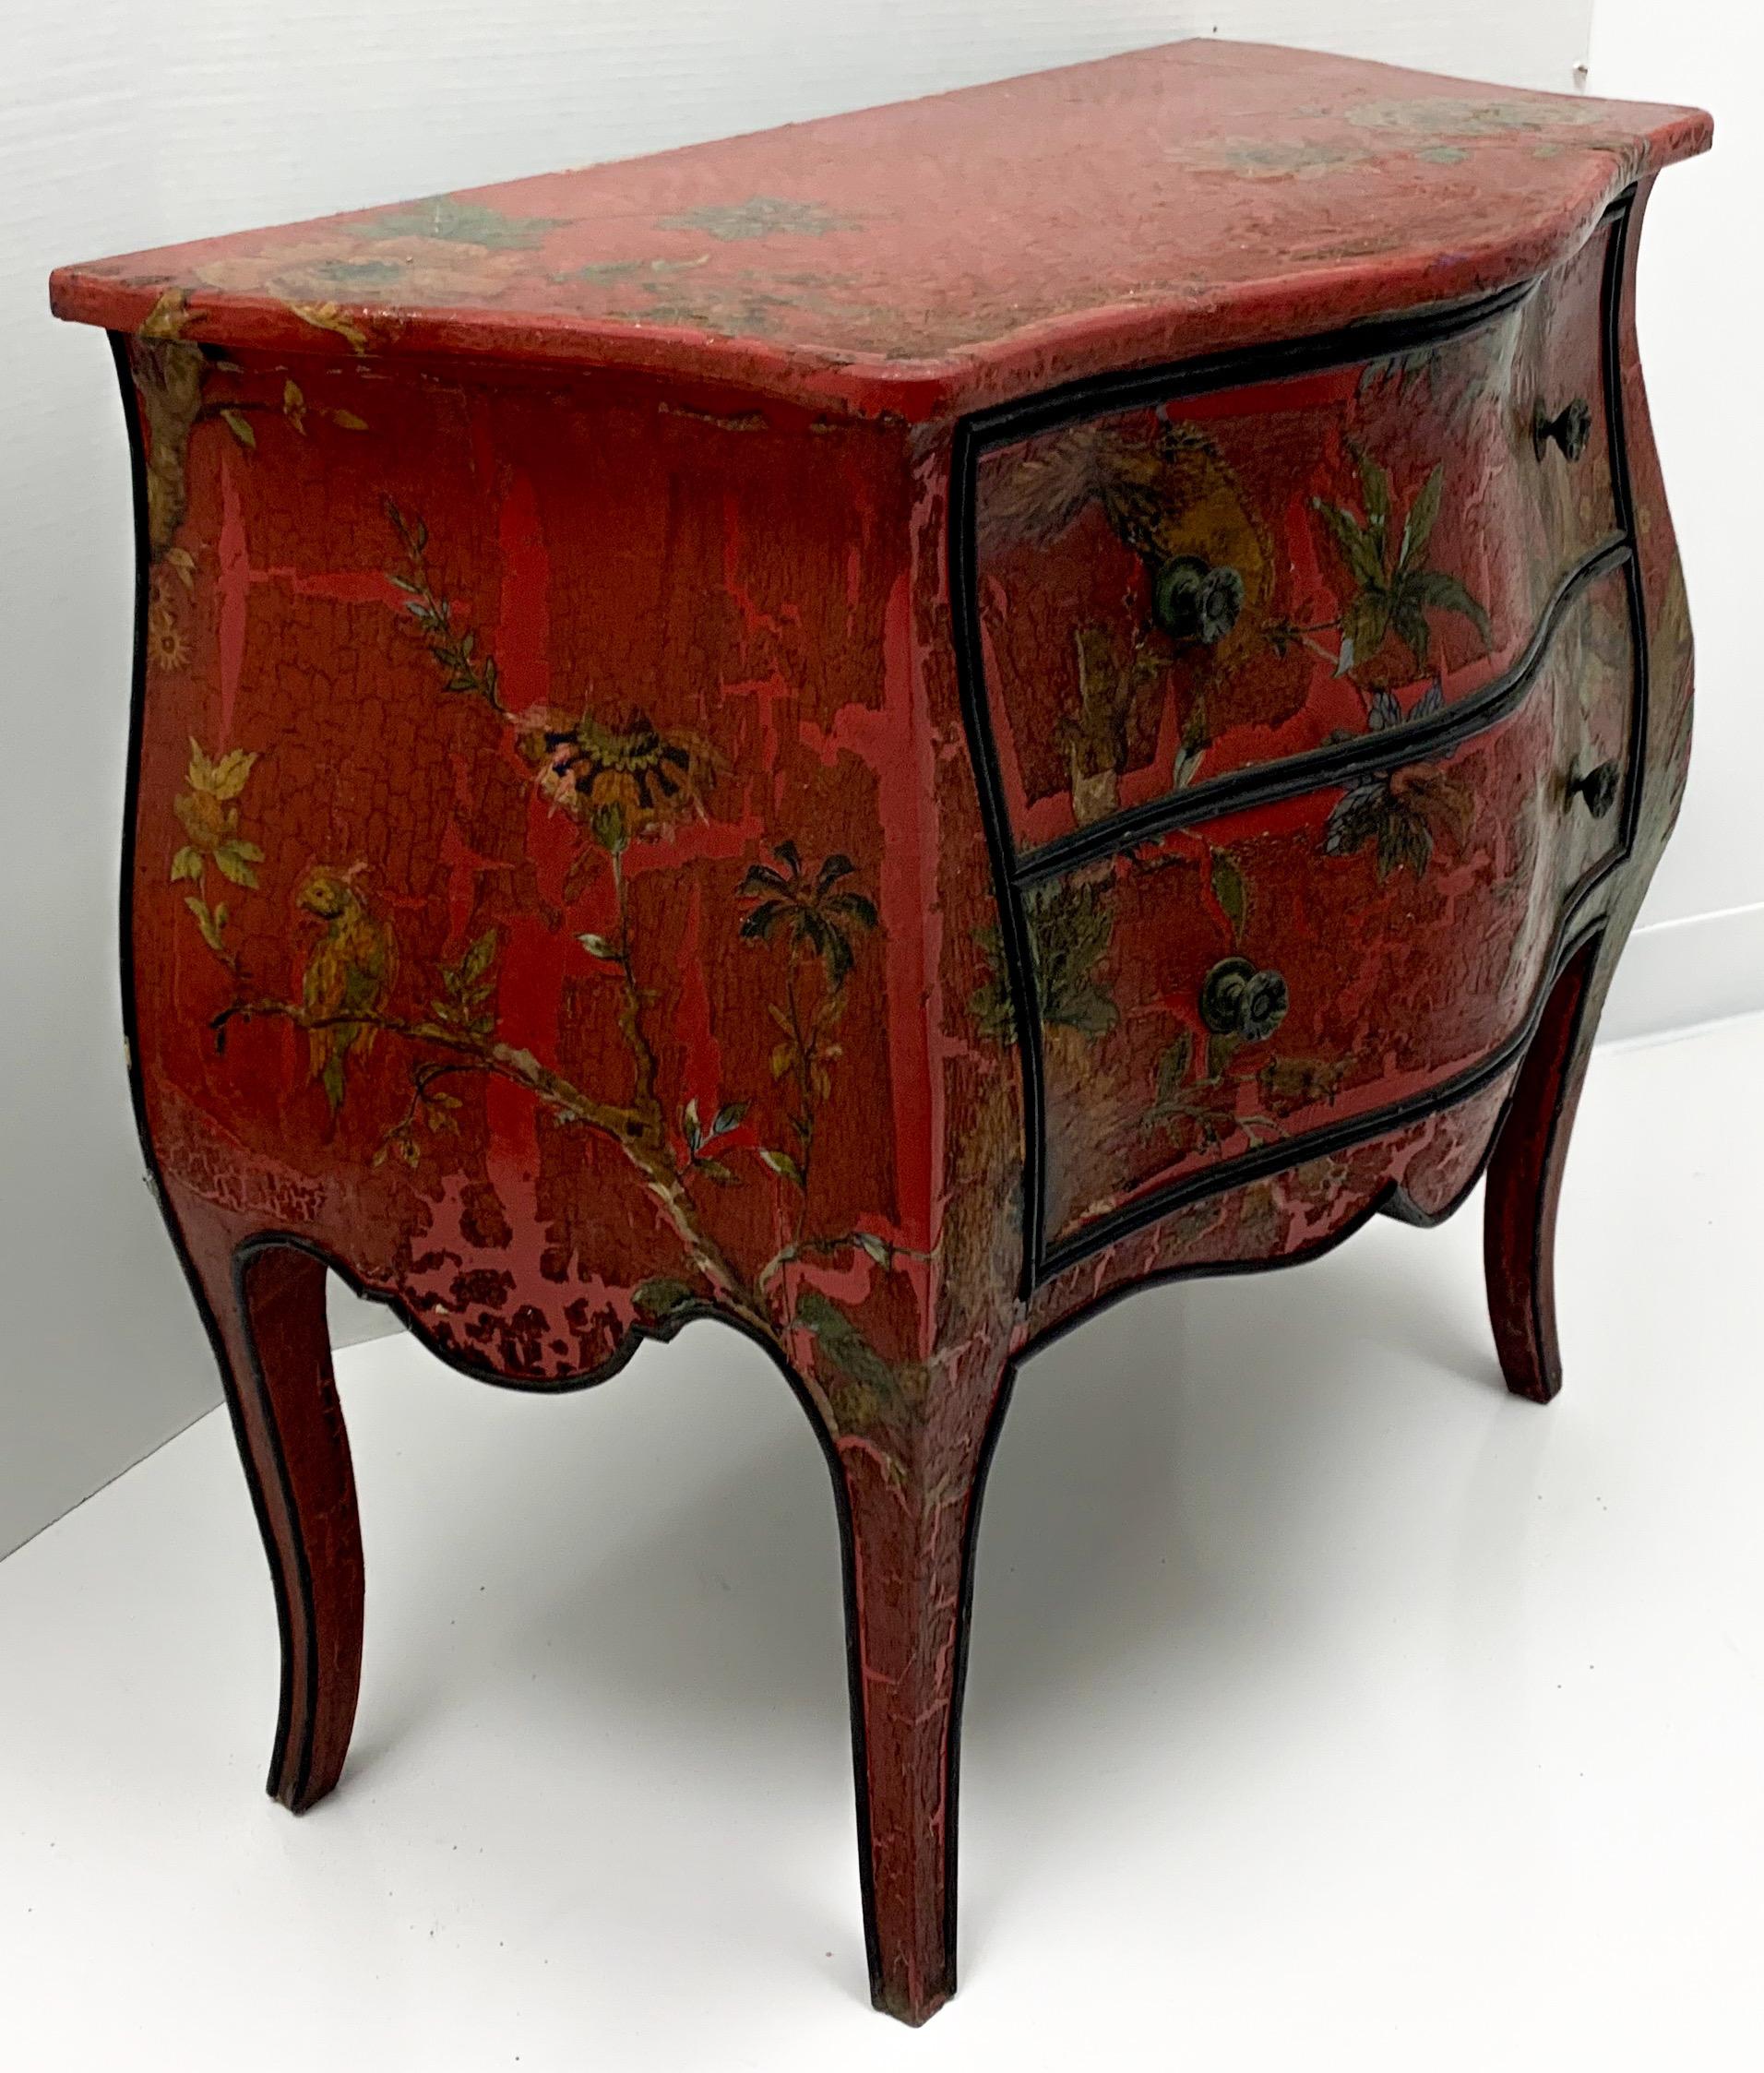 Louis XVI Antique French Red Chinoiserie Bombe Chest of Drawers with Decoupage